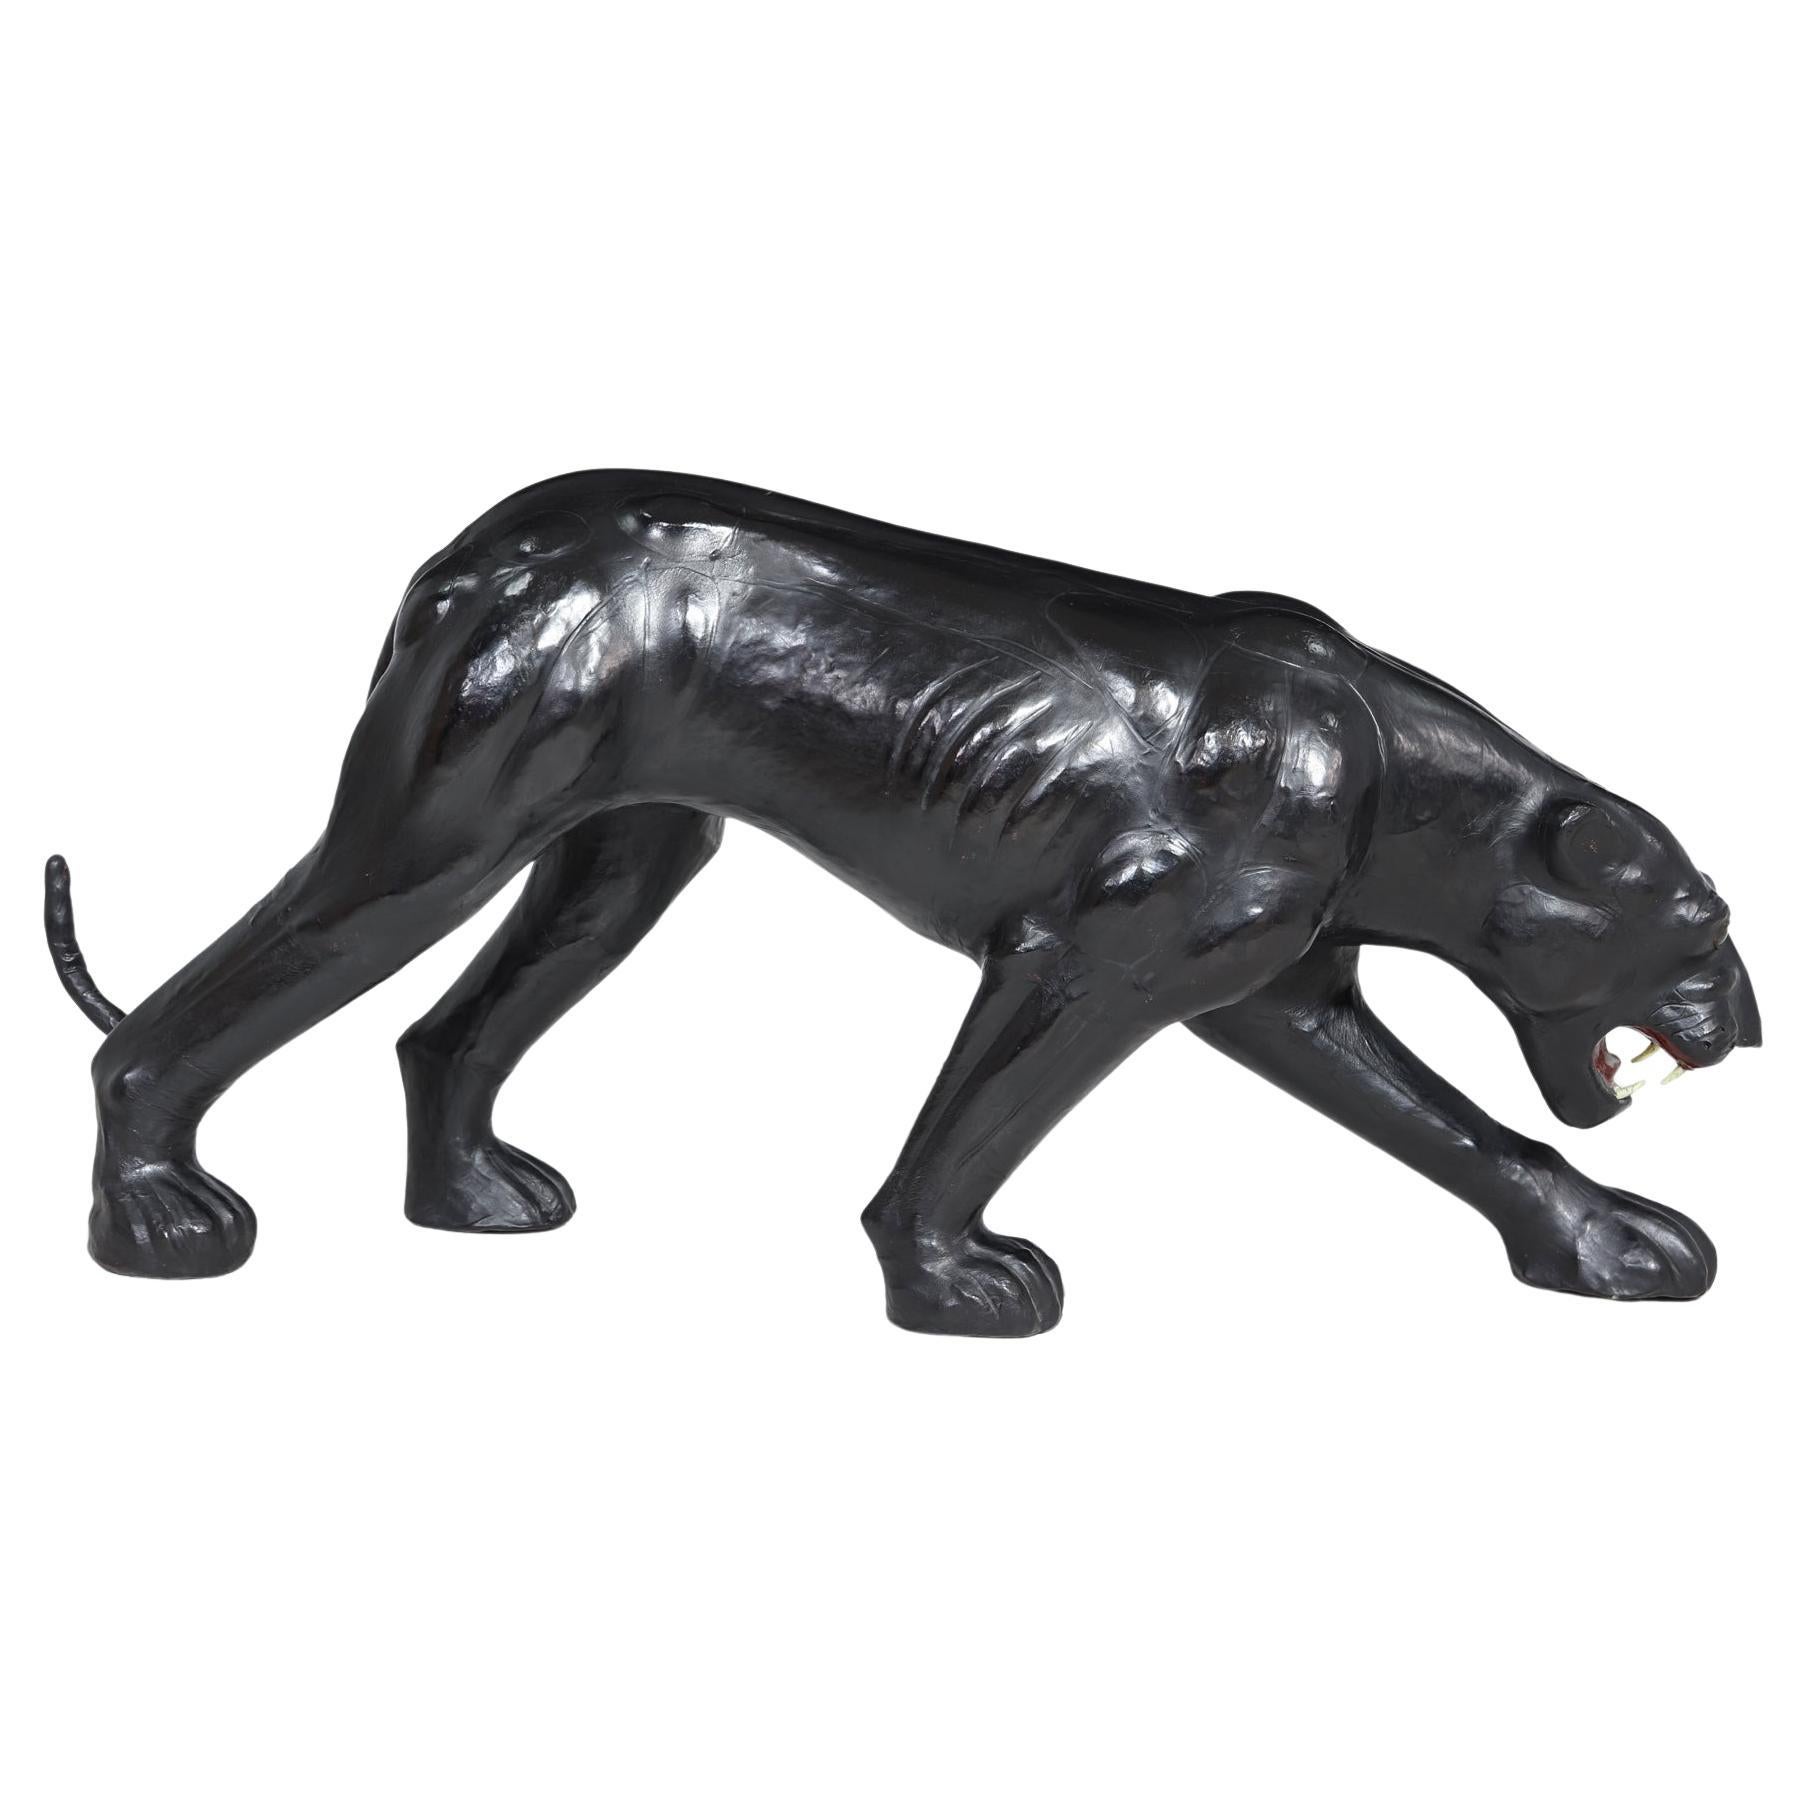 Large Leather Clad Panther Sculpture For Sale